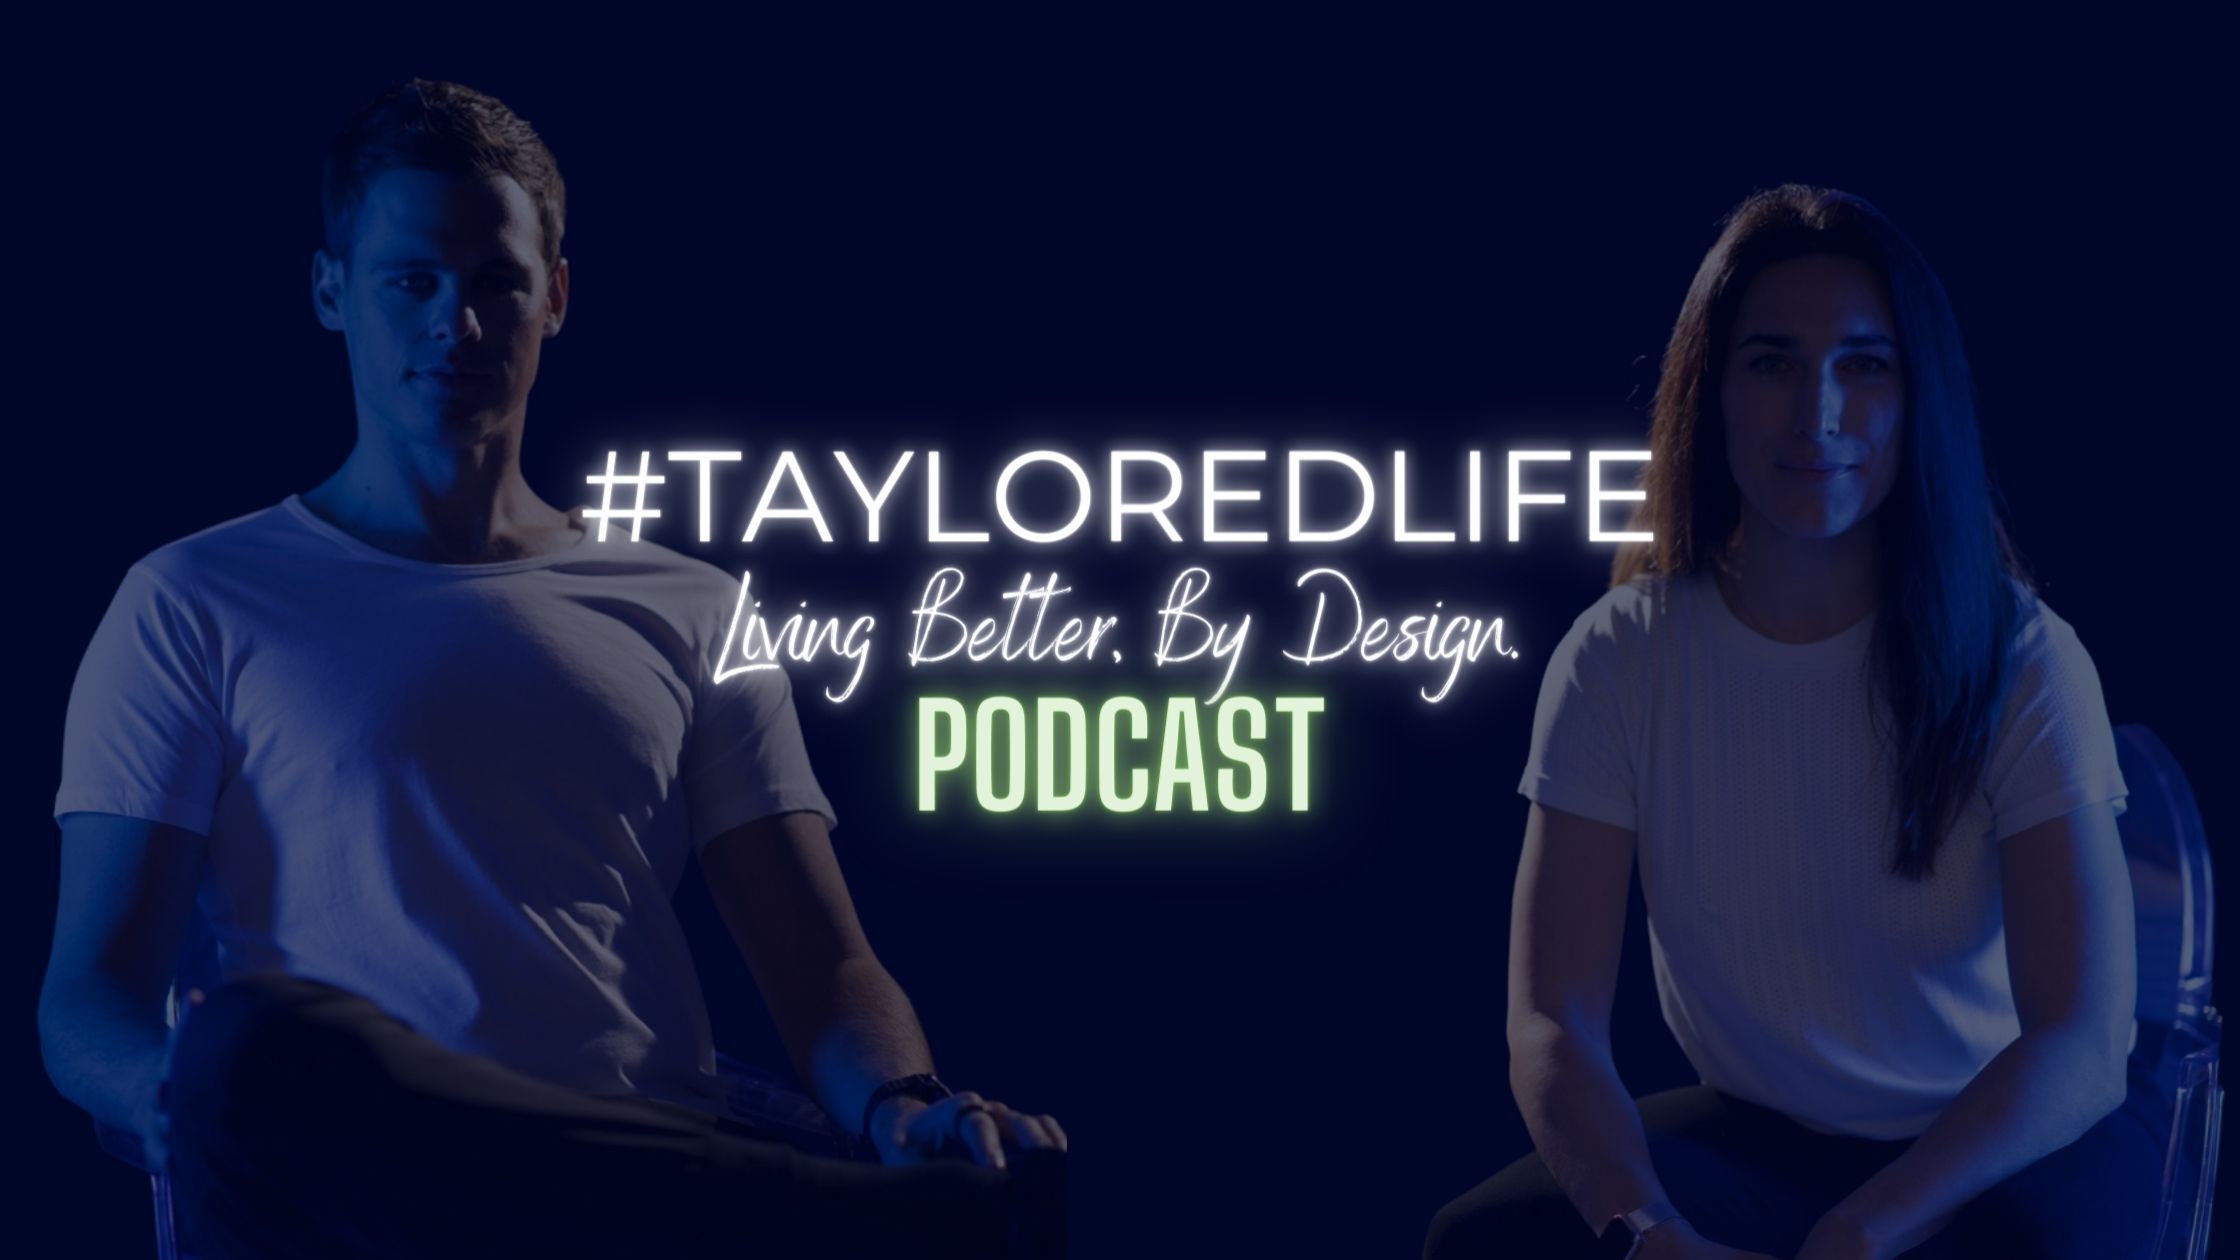 Taylored Life Podcast